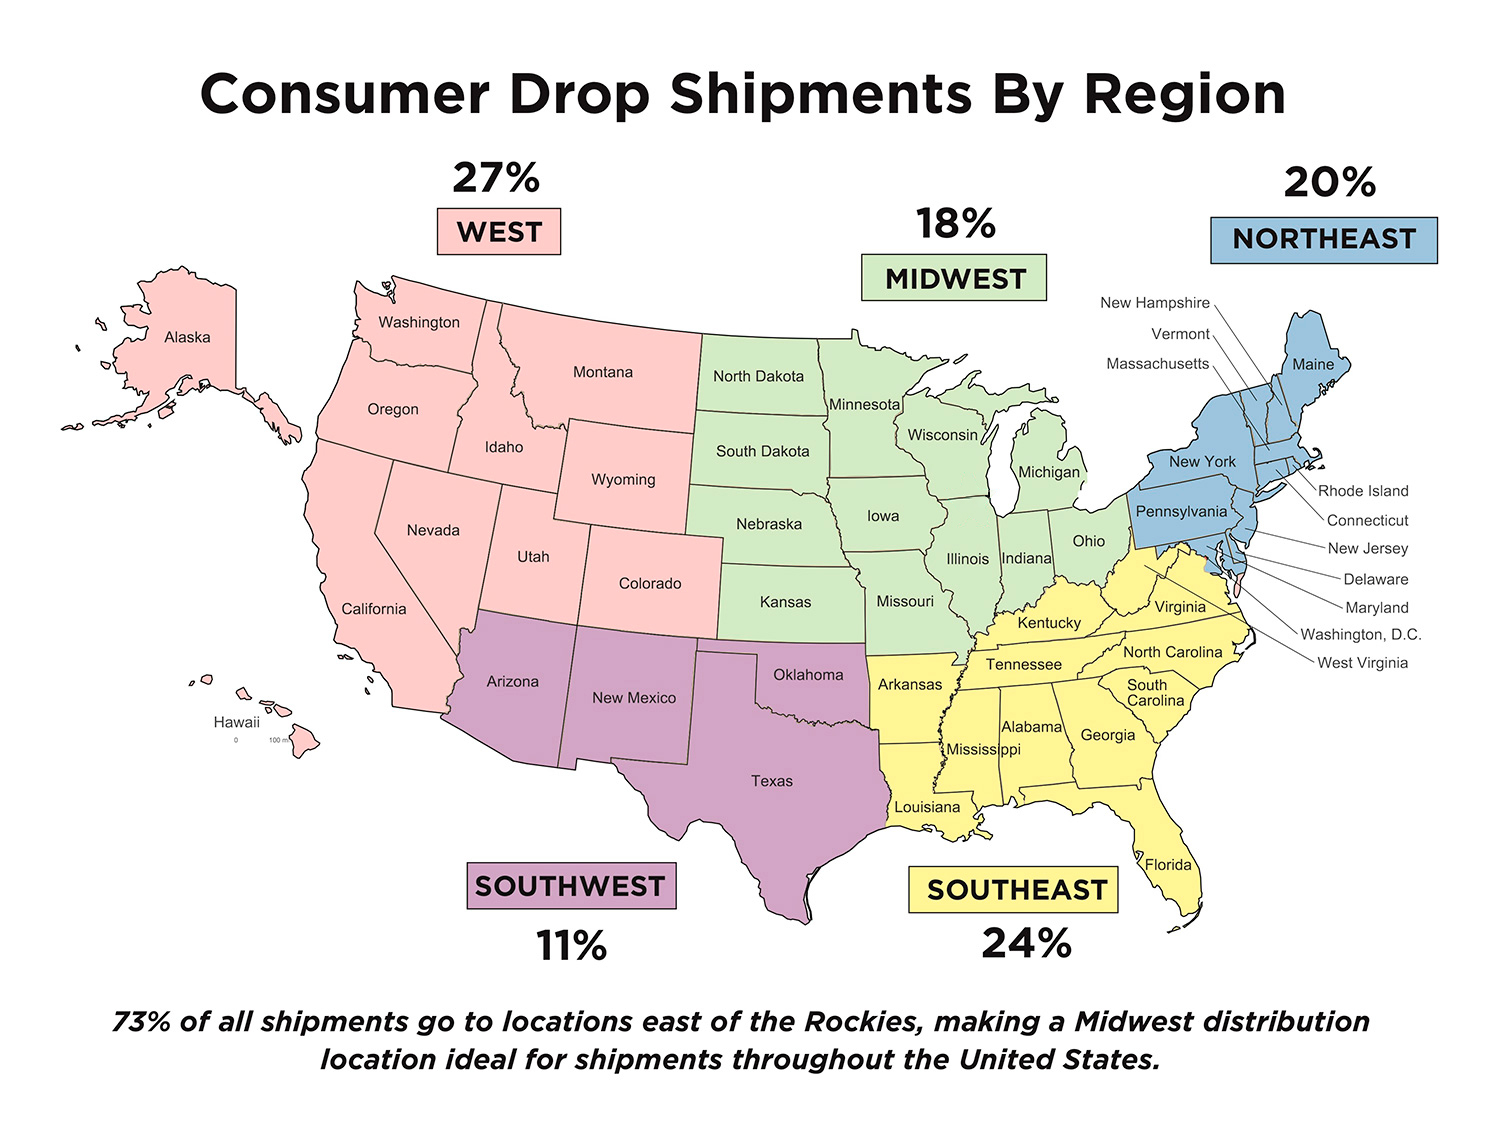 Consumer Drop Shipments by region: 27% ship to the West, 11% southwest, 18% to the Midwest, 20 North eat, and 24% southeast.